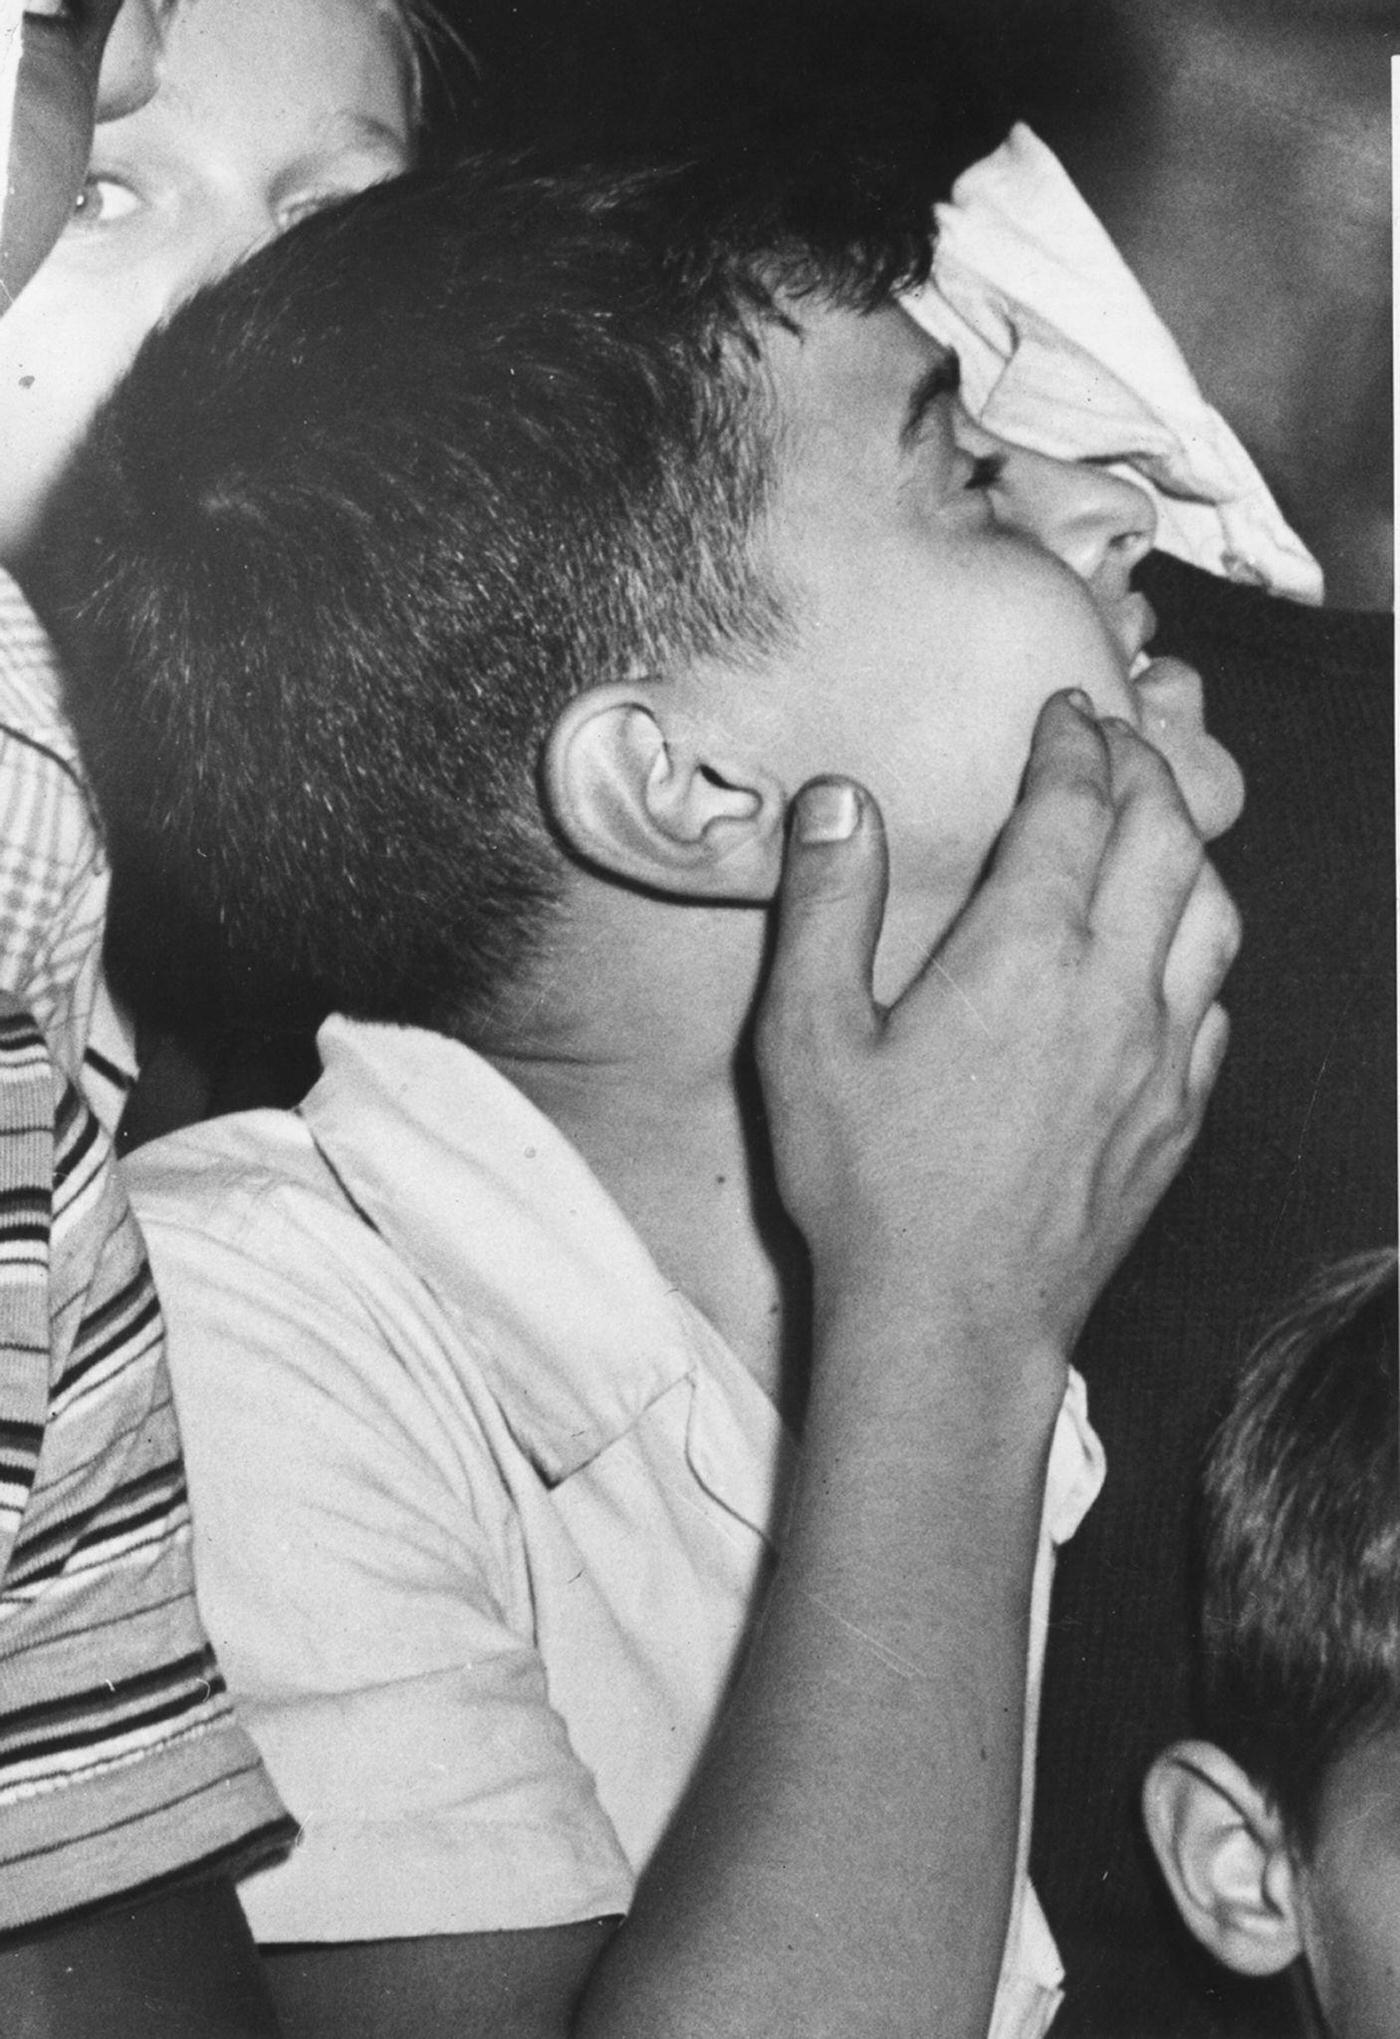 A boy looking up at the Empire State Building where a plane (a North American Aviation B-25 Mitchell bomber) had crashed into the building